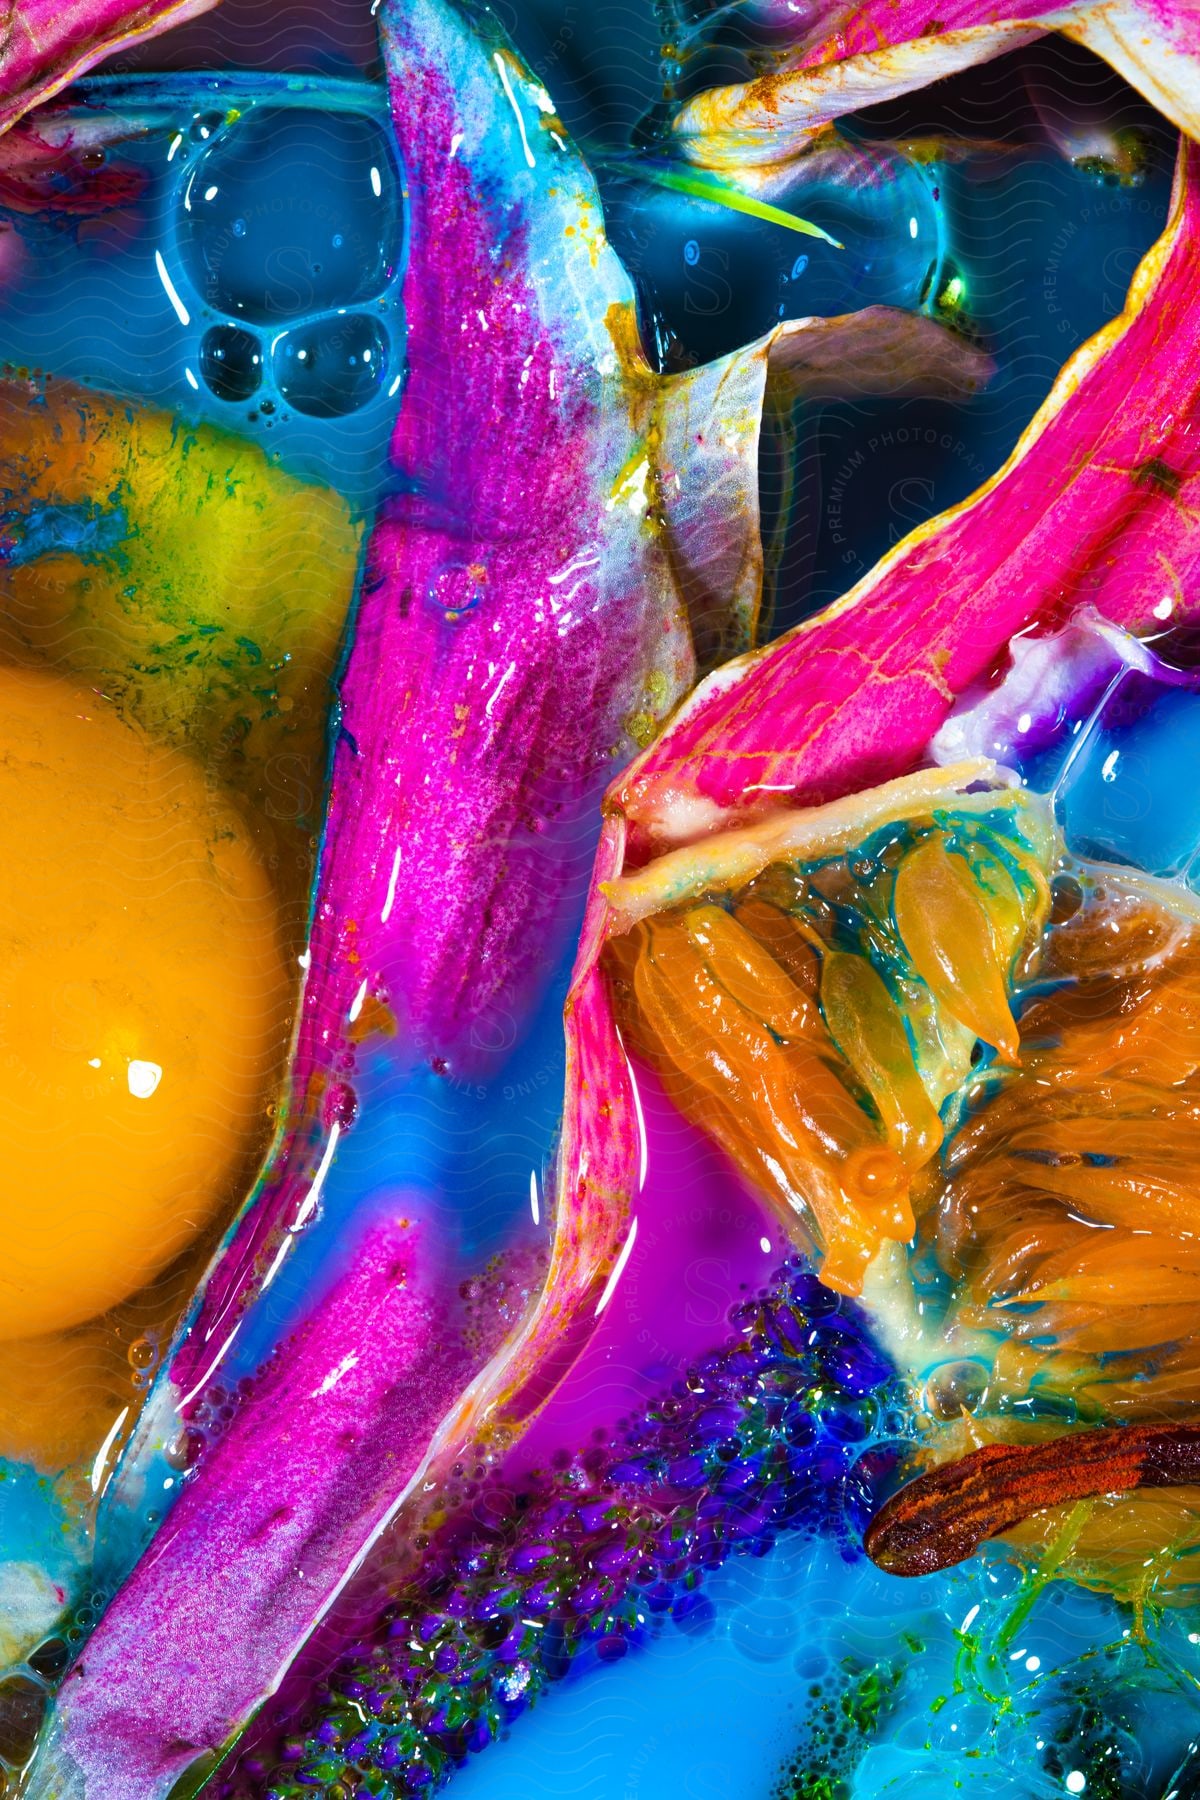 Vibrant colors of liquid paint merge to form an abstract work of art